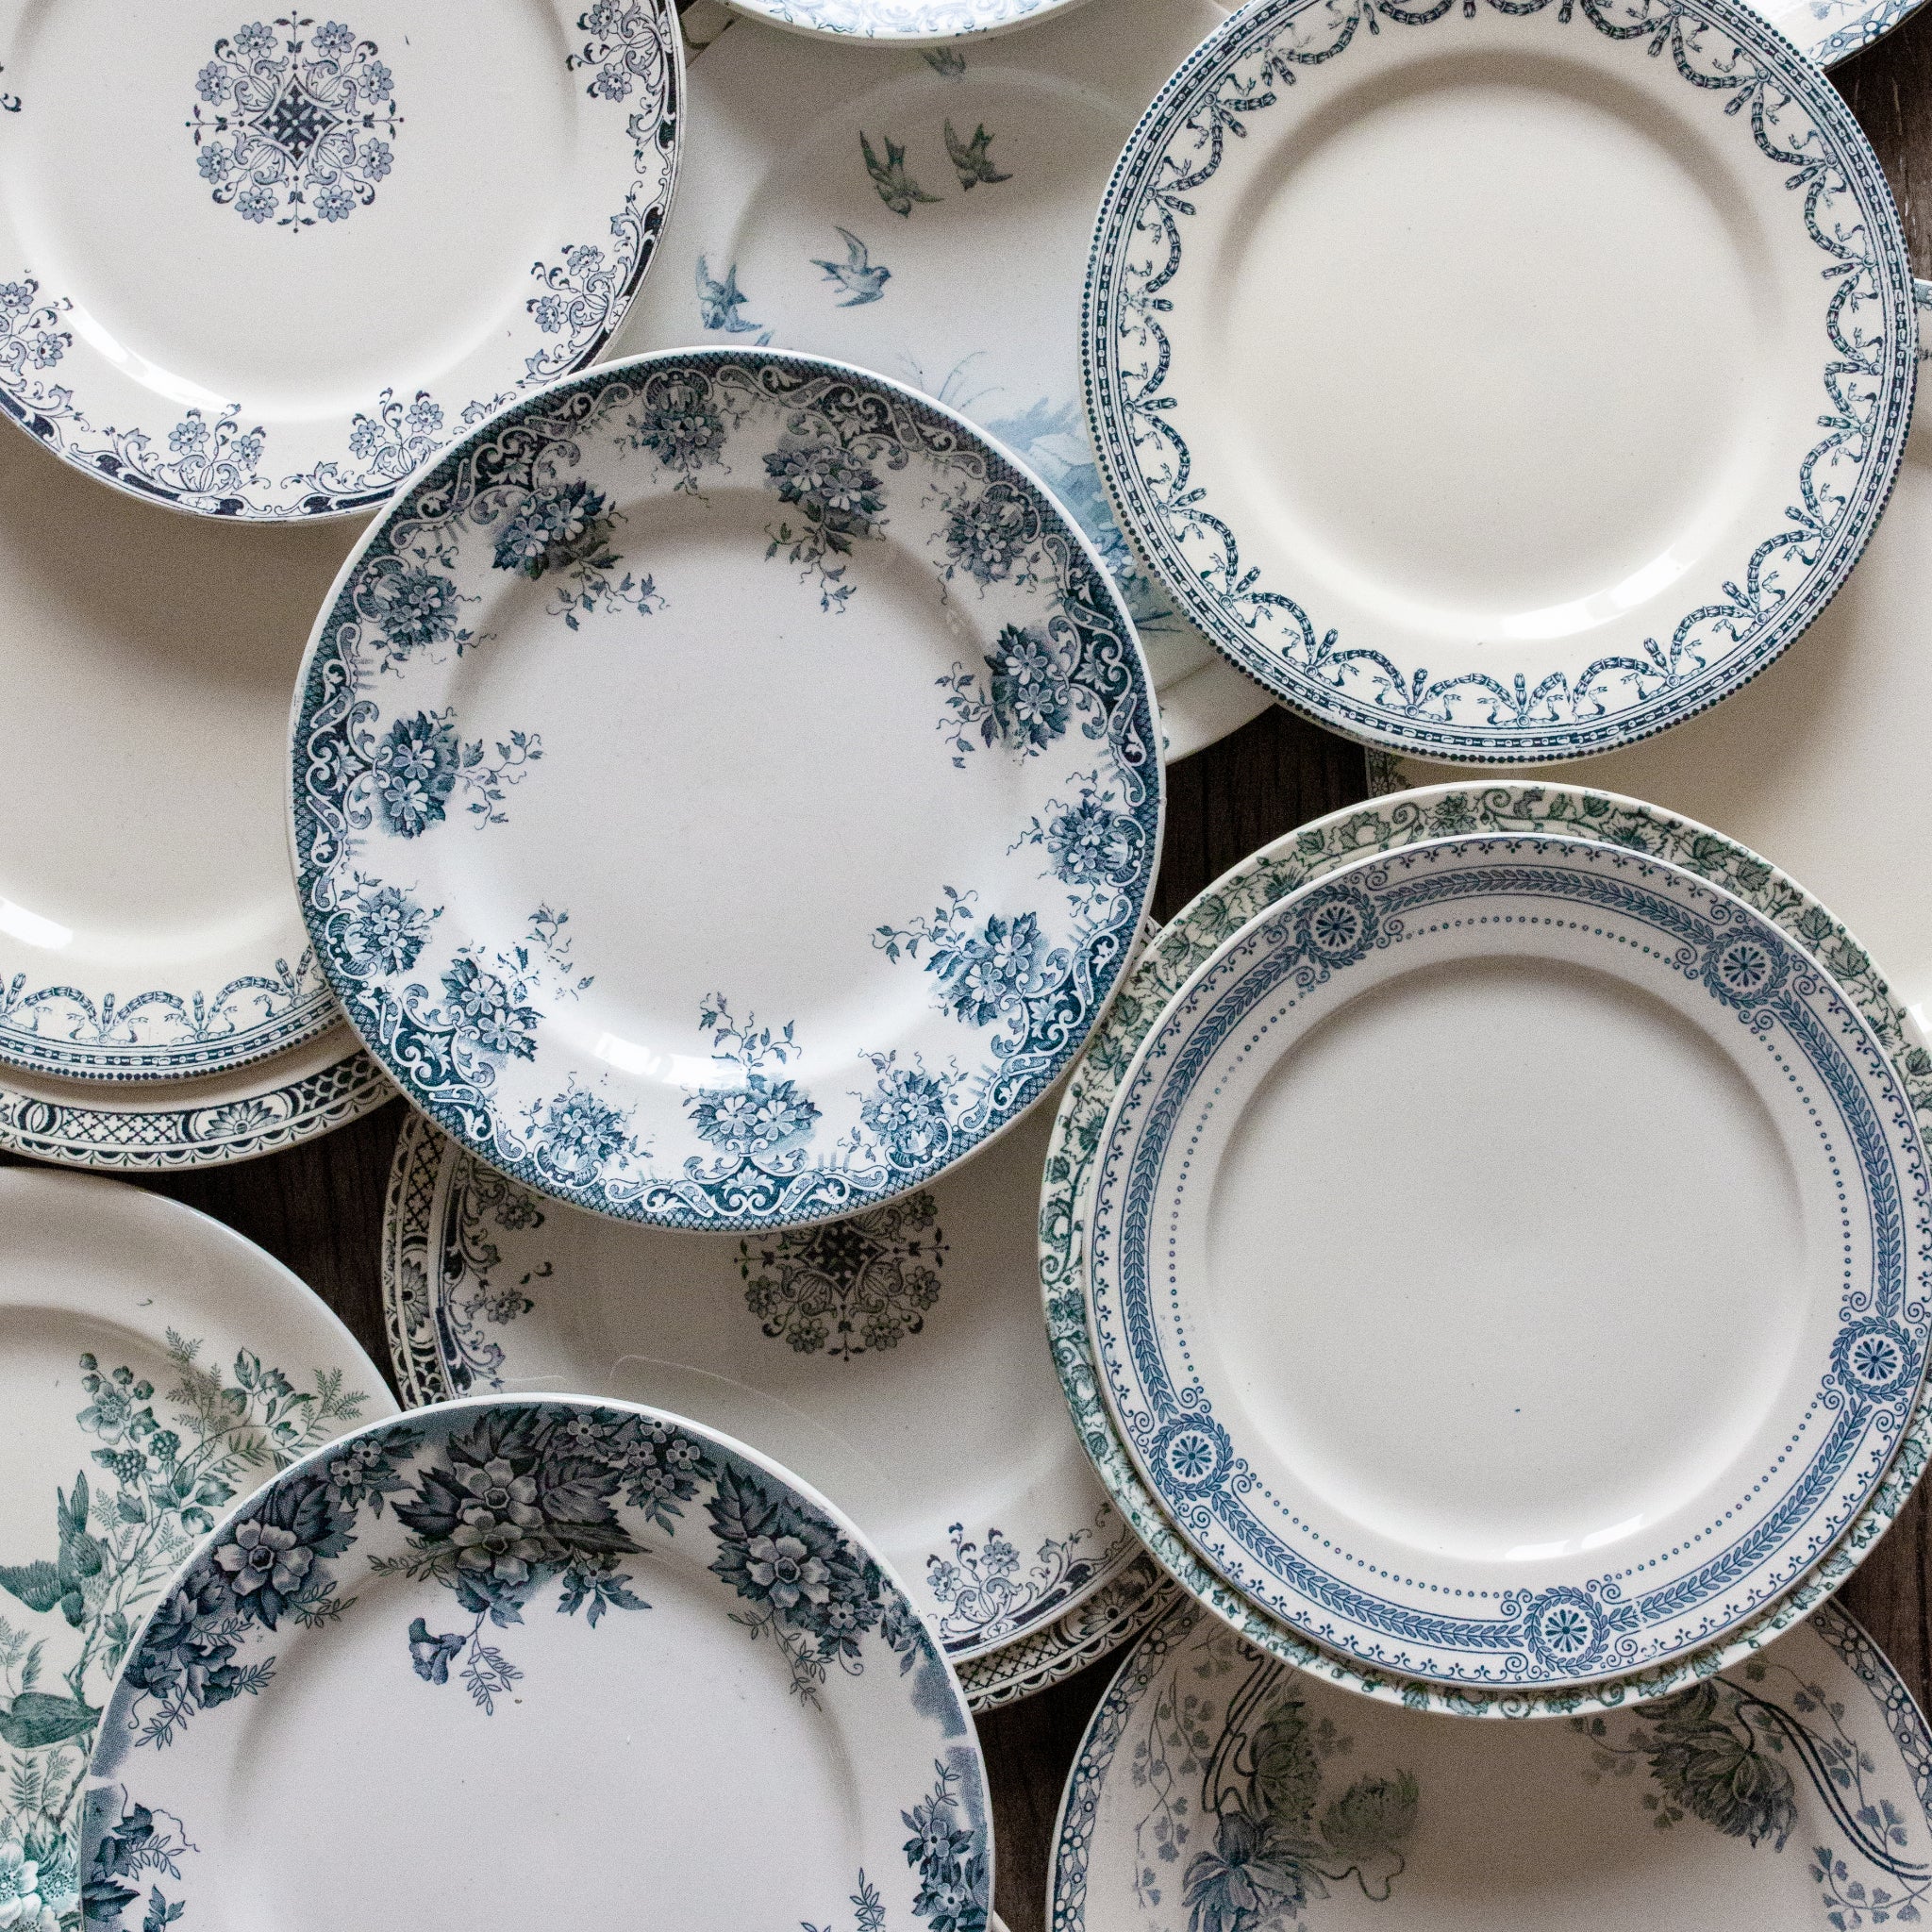 Plate collection. Old Plates.